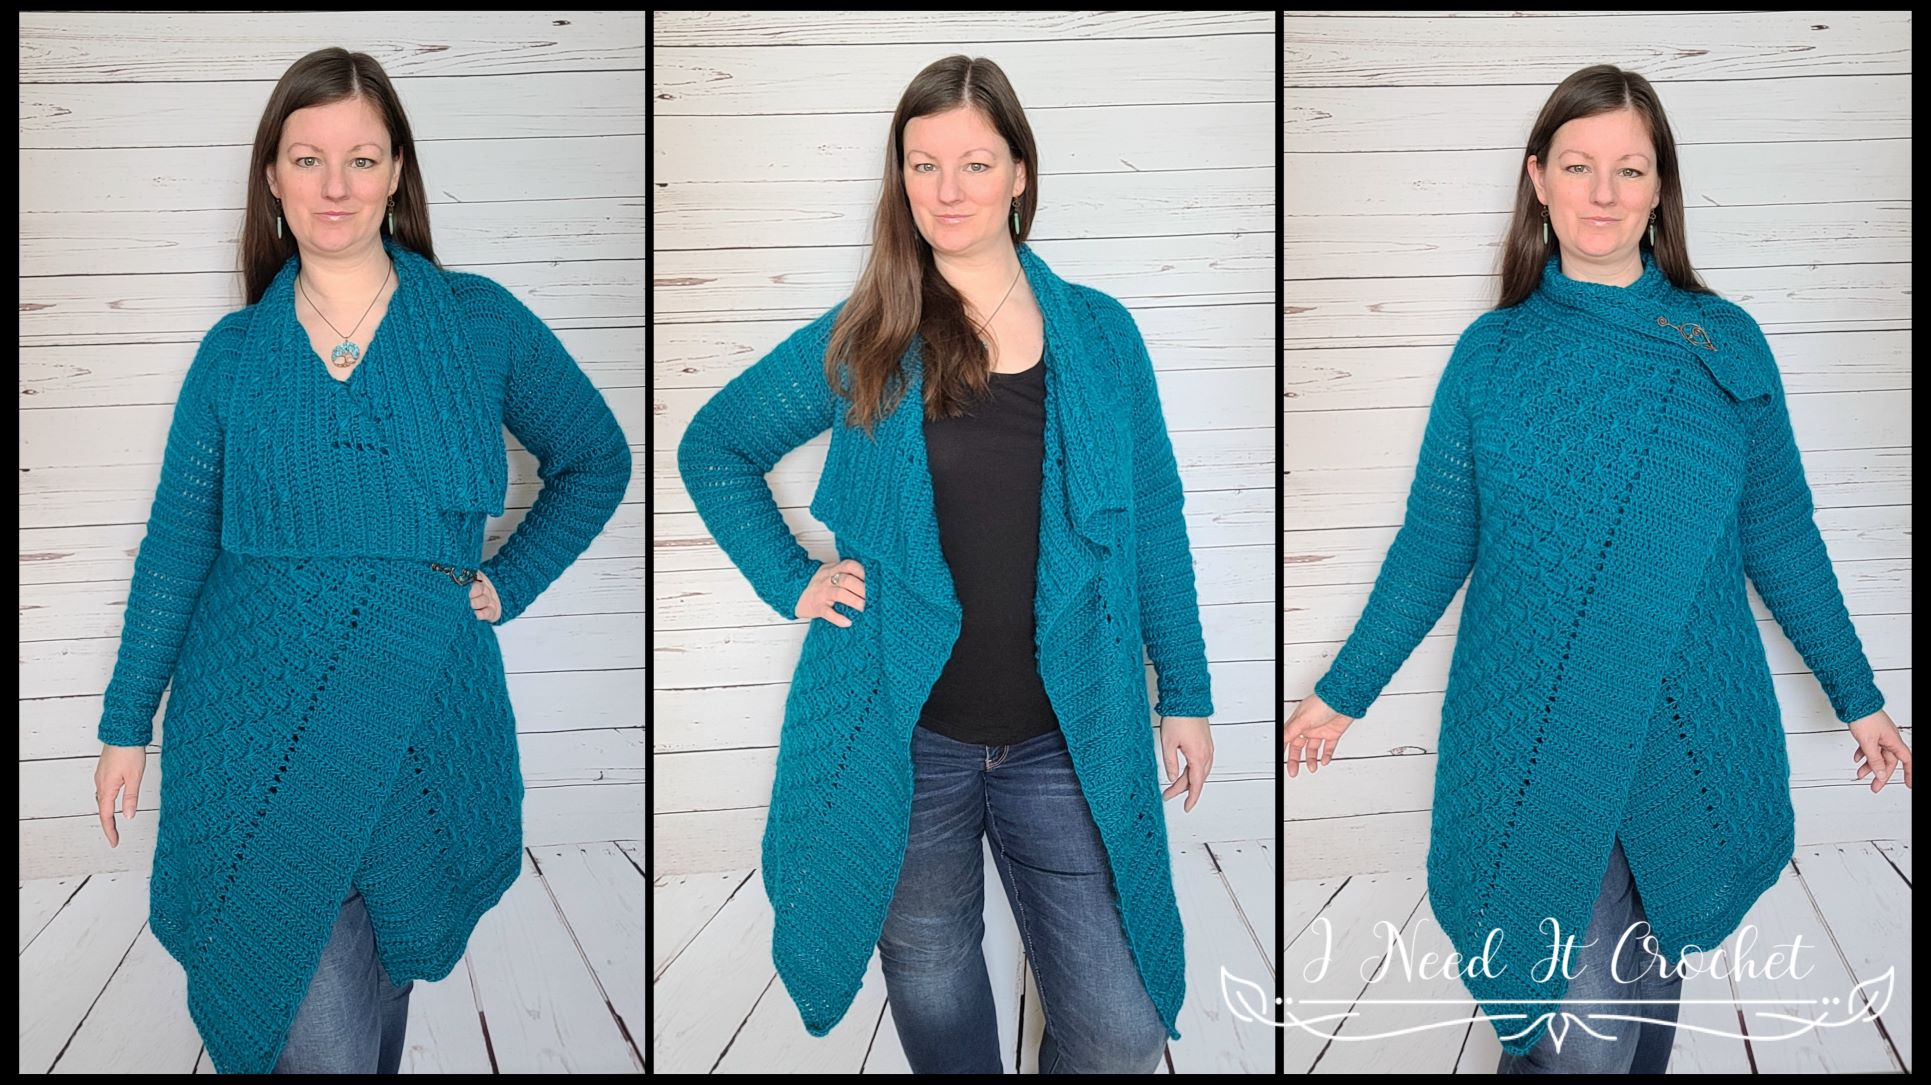 59 Free Crochet Sweater and Cardigan Patterns [Surprisingly Easy]